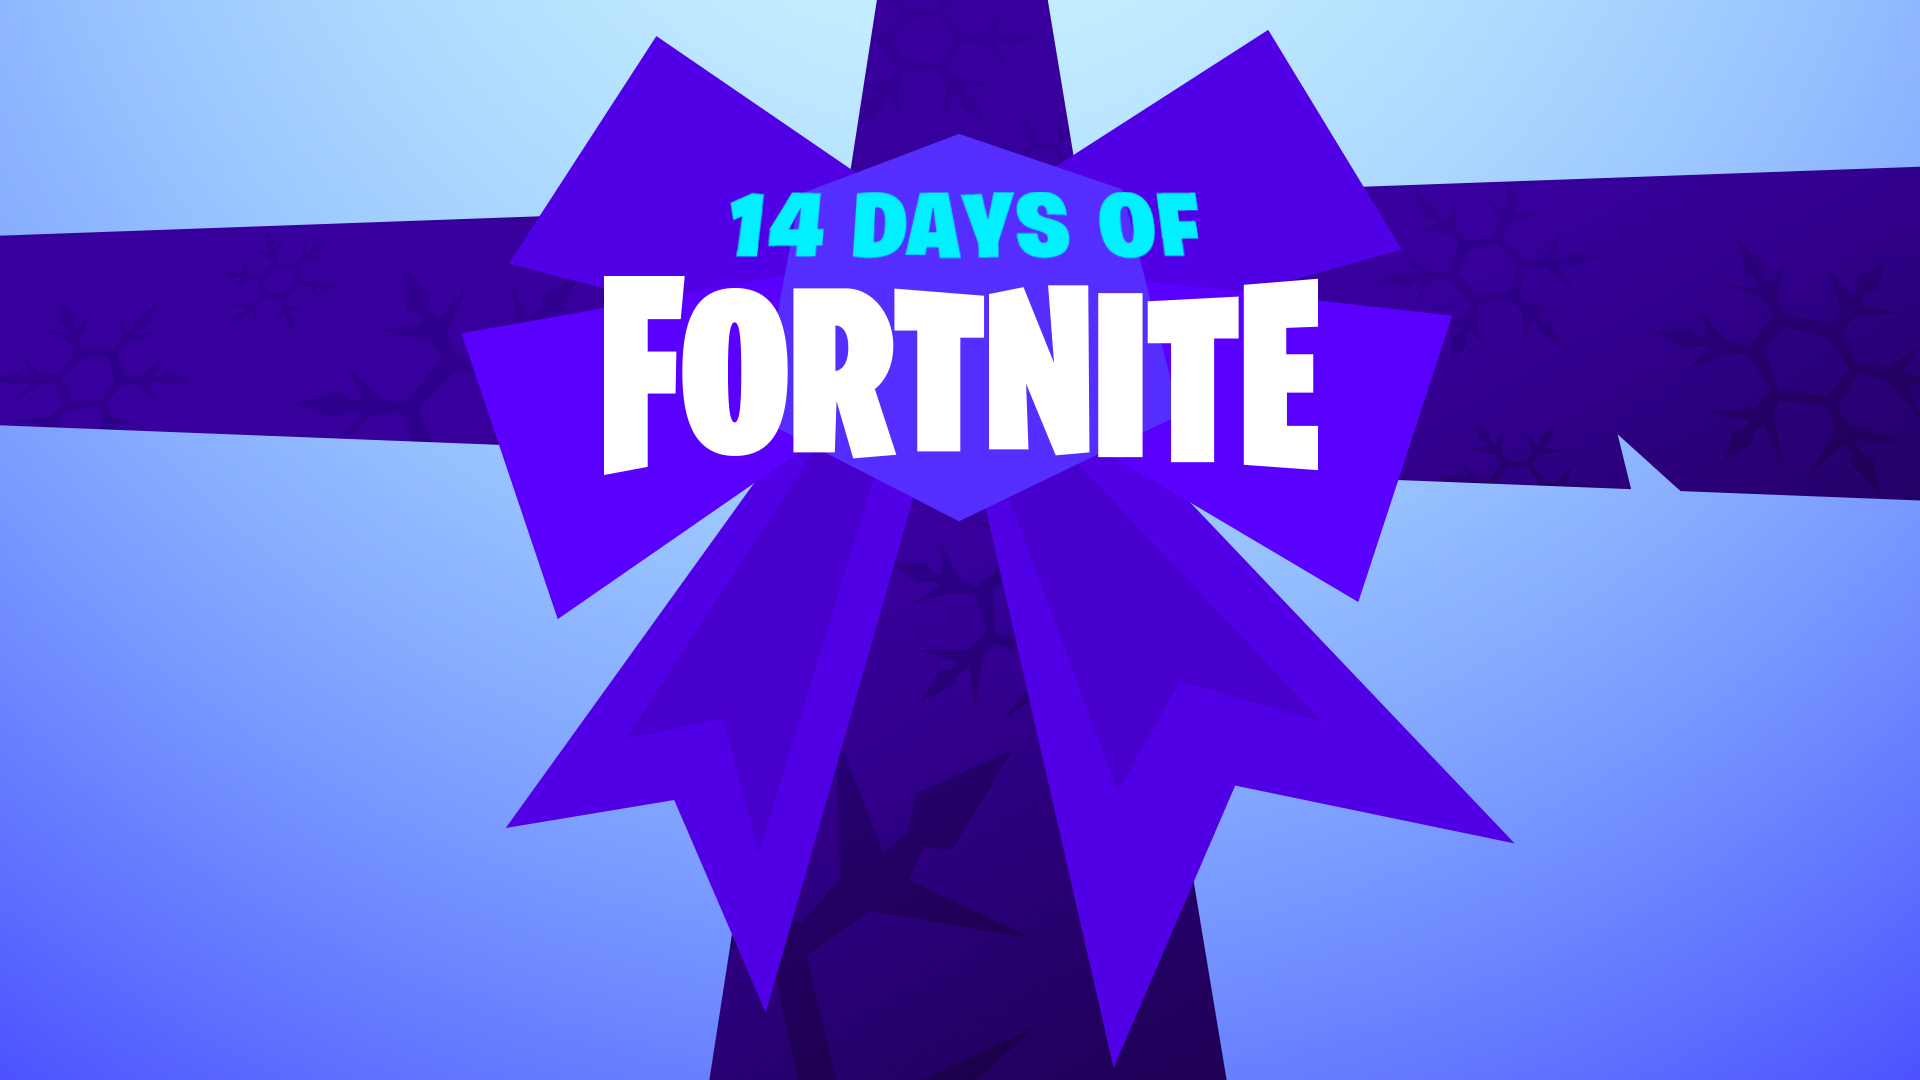 here are all the challenges and rewards for the 14 days of fortnite event - fortnite handy server